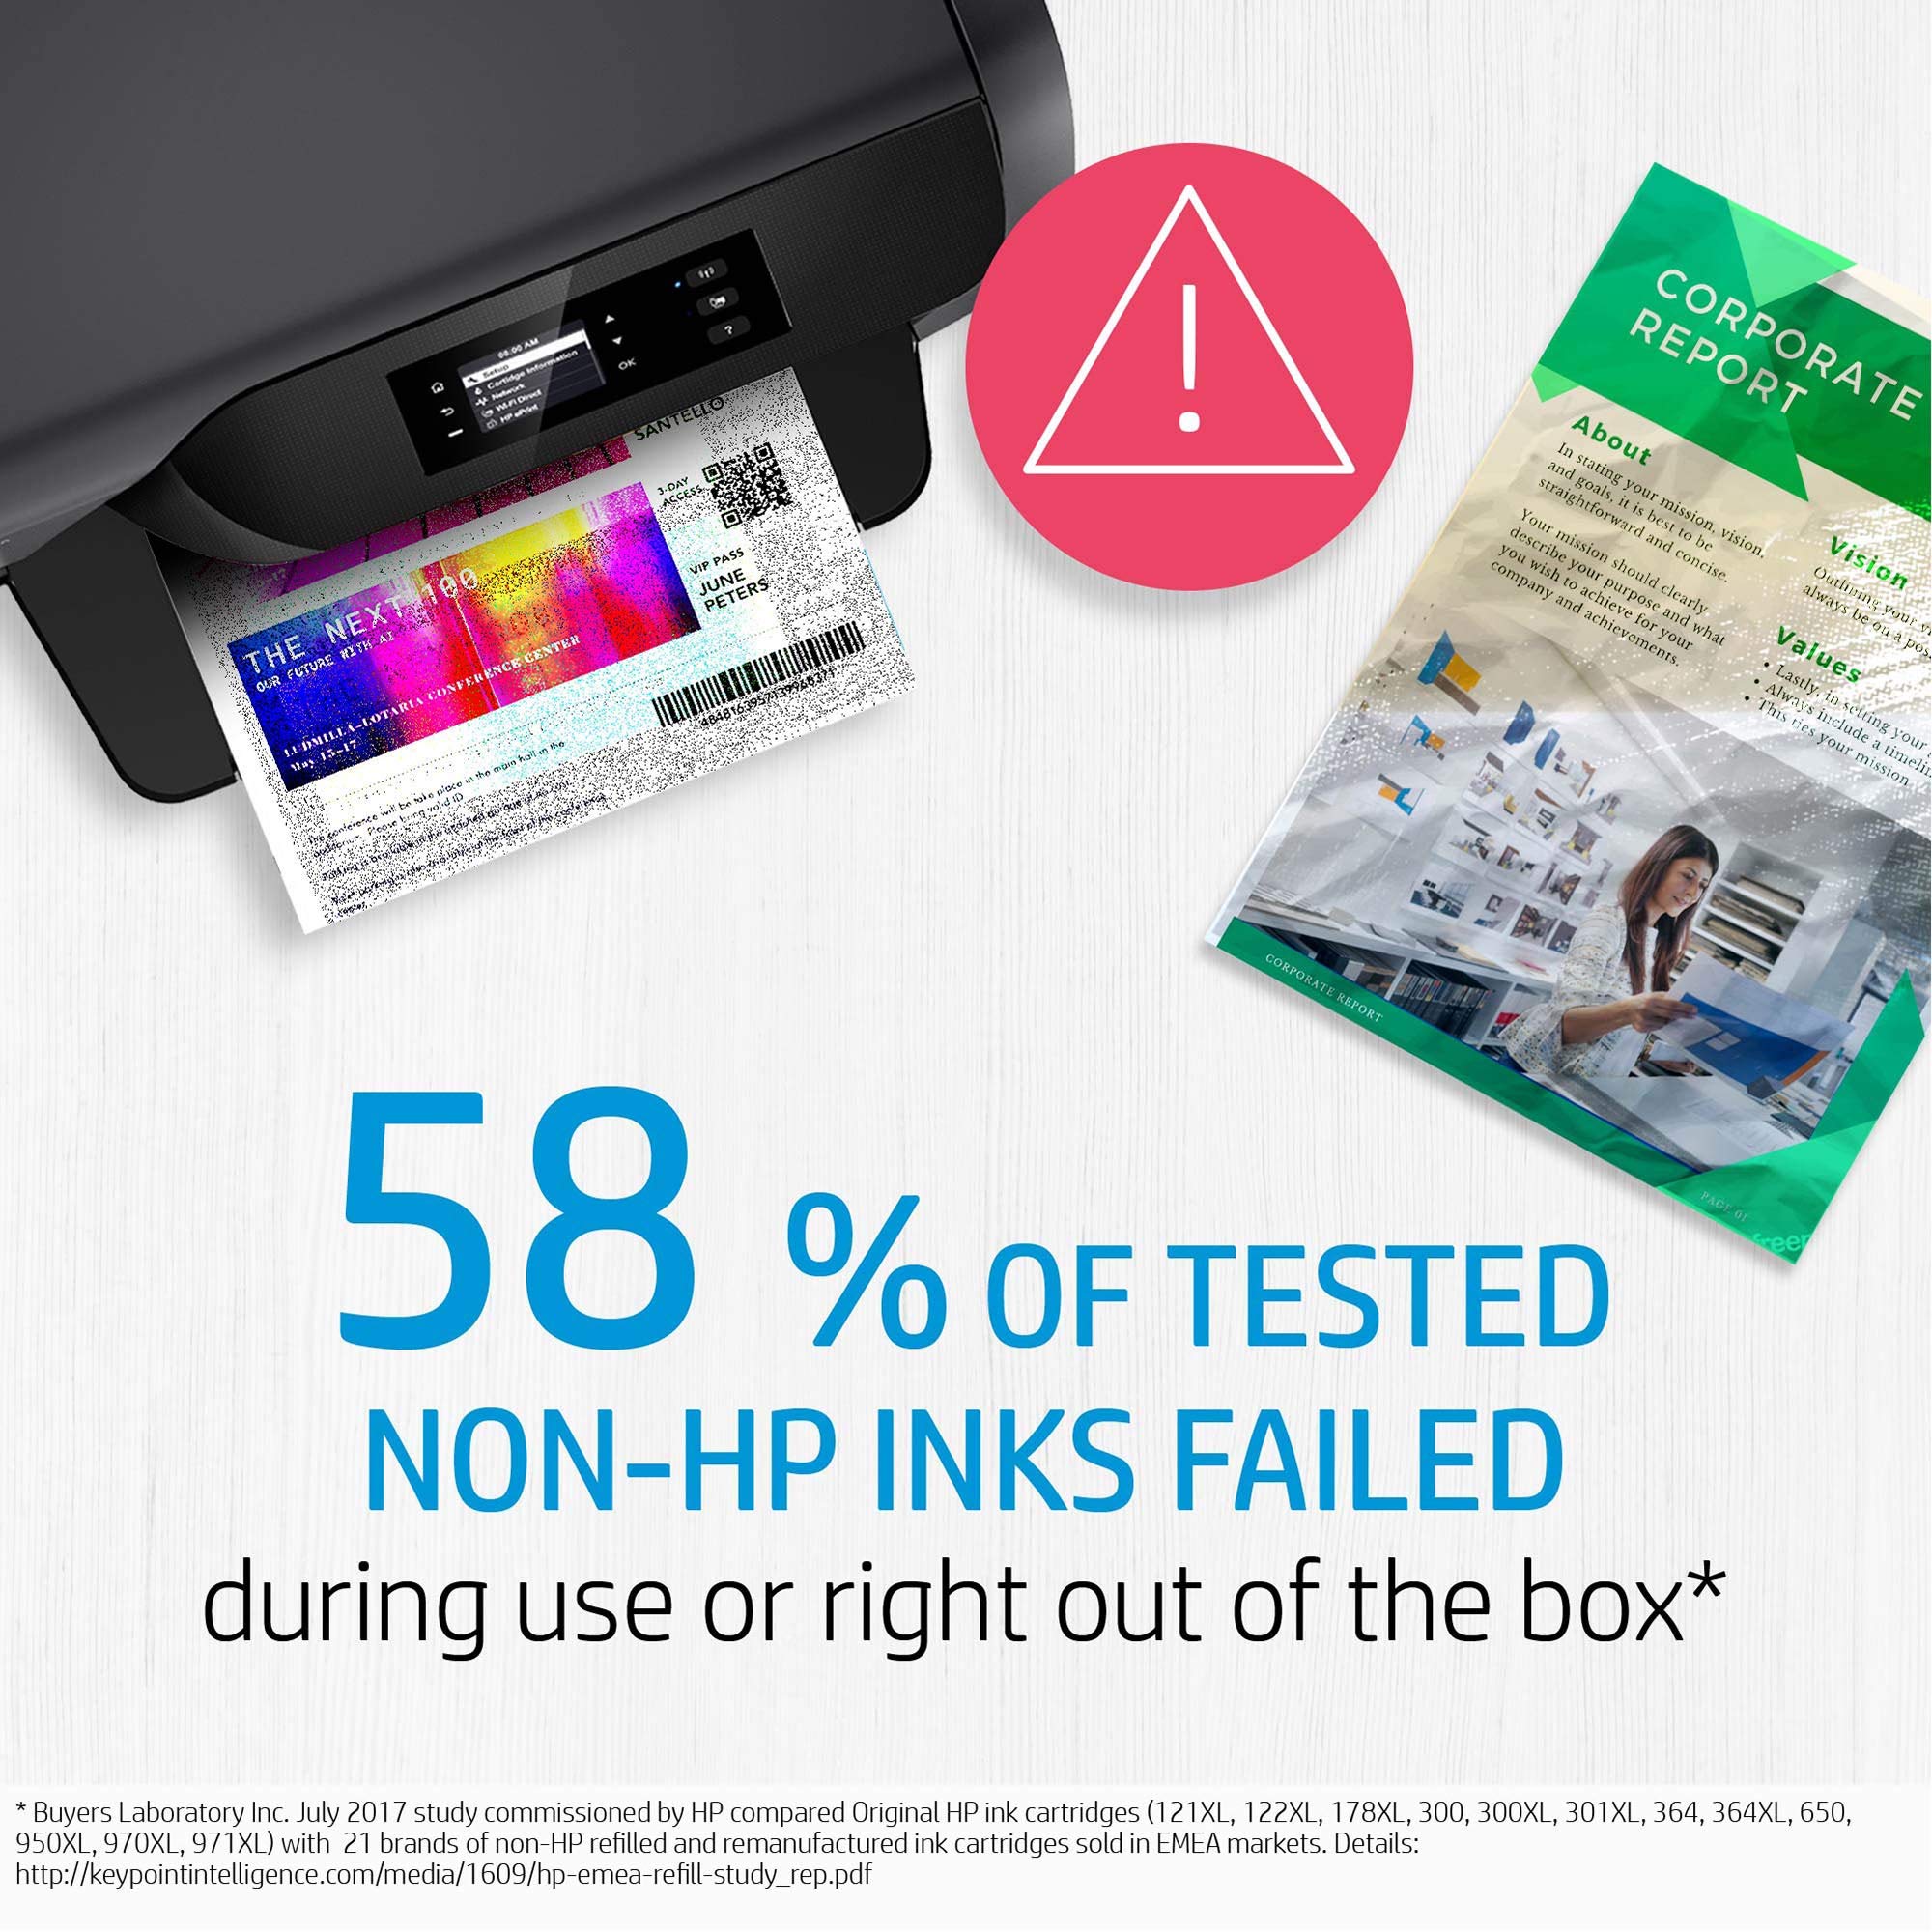 Hp - 305 3Ym61Ae Ink Cartridge, Compatible With Hp Deskjet 2300, 2700, Hp Deskjet Plus Series 4100, Hp Envy 6000 Series, Hp Deskjet Envy Pro 6400 Series, Black